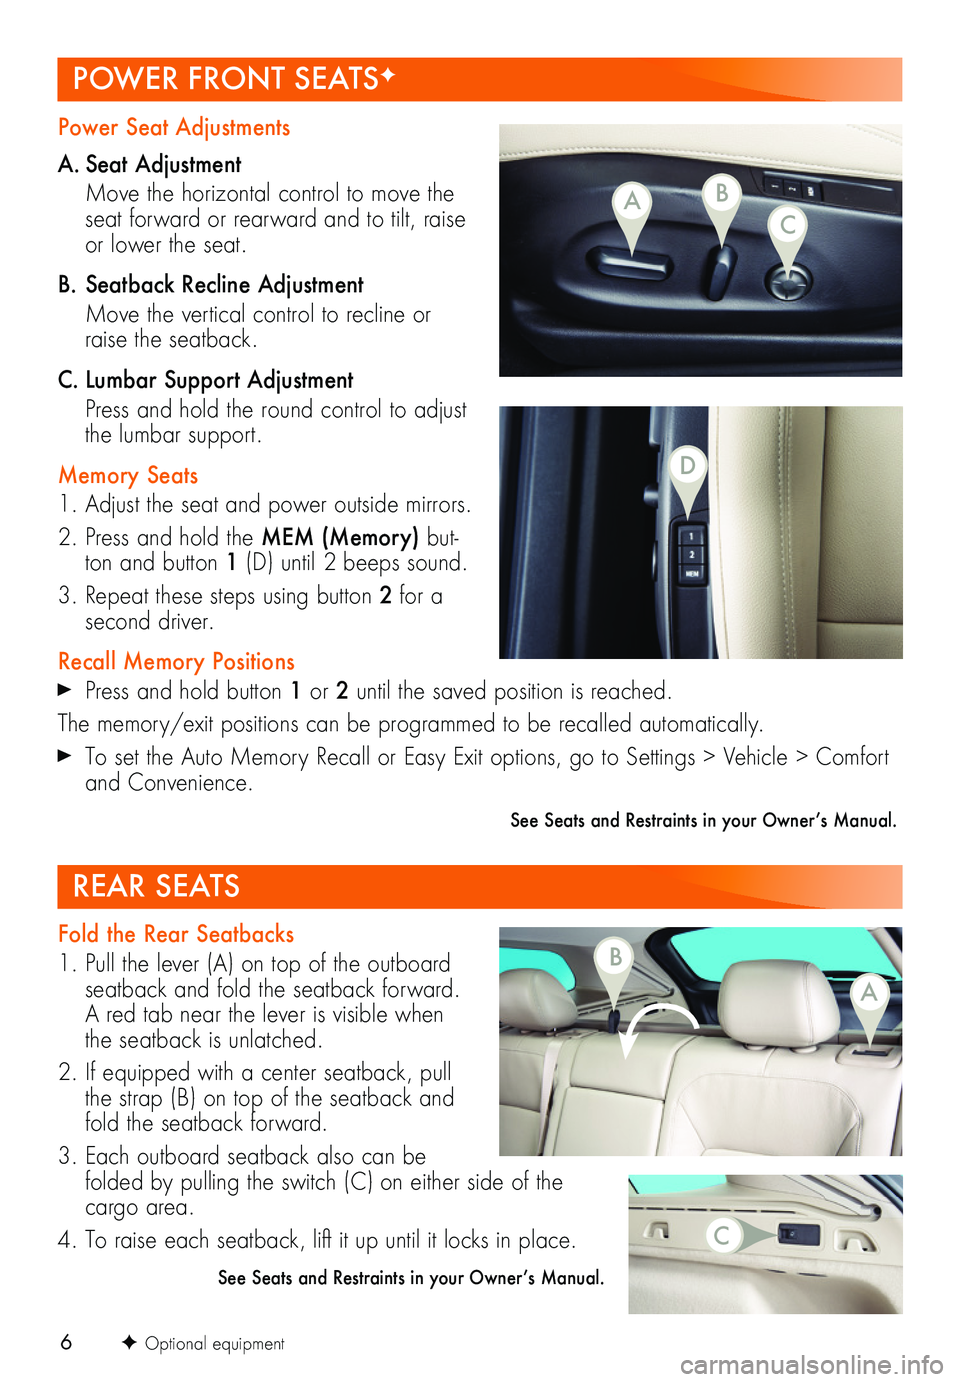 BUICK REGAL TOURX 2018  Get To Know Guide 6
Power Seat Adjustments
A. Seat Adjustment
 Move the horizontal control to move the seat forward or rearward and to tilt, raise or lower the seat.
B. Seatback Recline Adjustment
 Move the vertical co